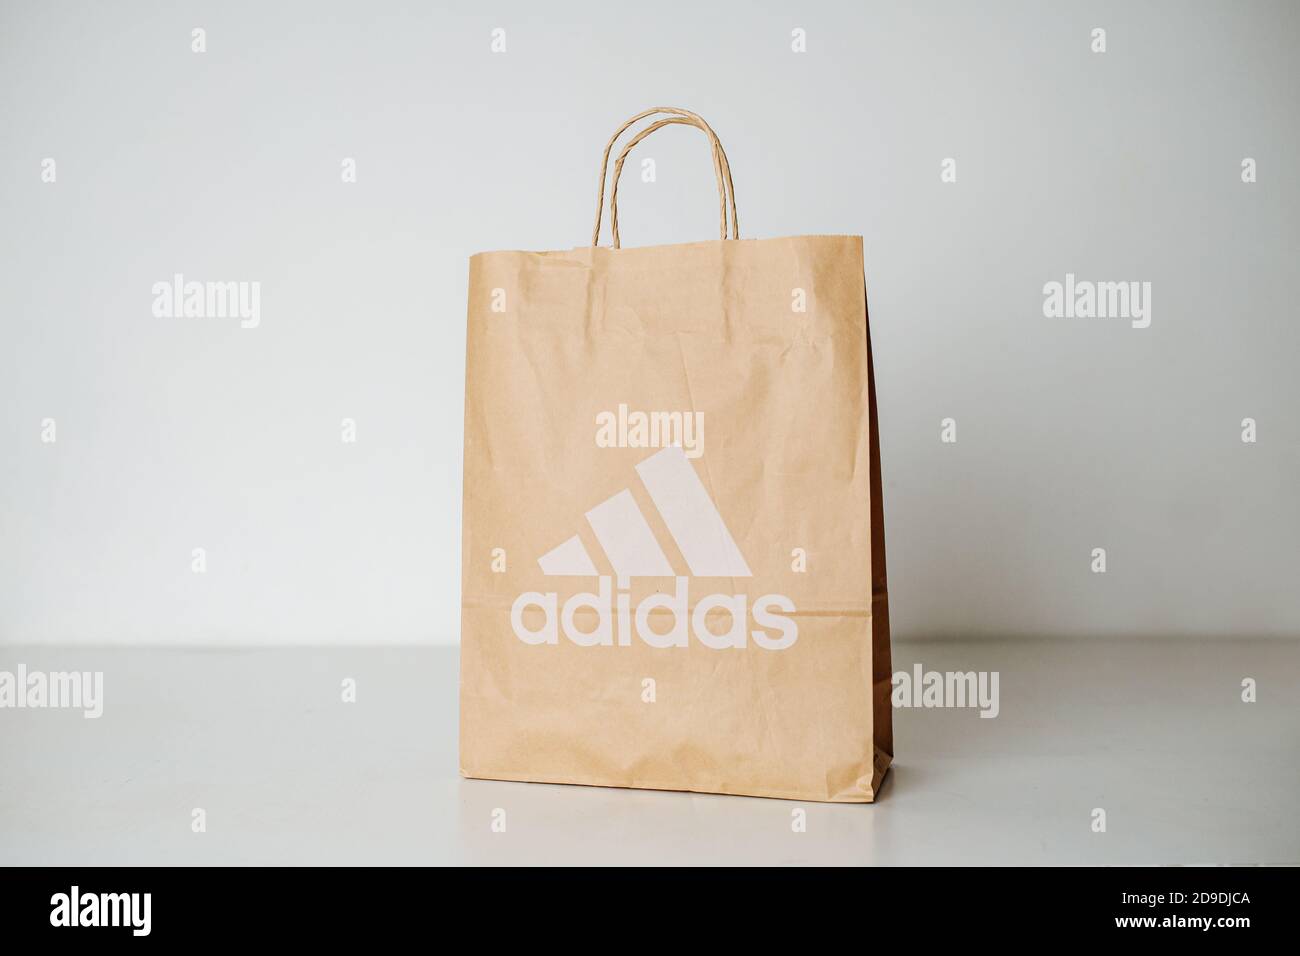 RUSSIA, UFA - NOVEMBER 02, 2020: Craft package adidas on white table Stock  Photo - Alamy